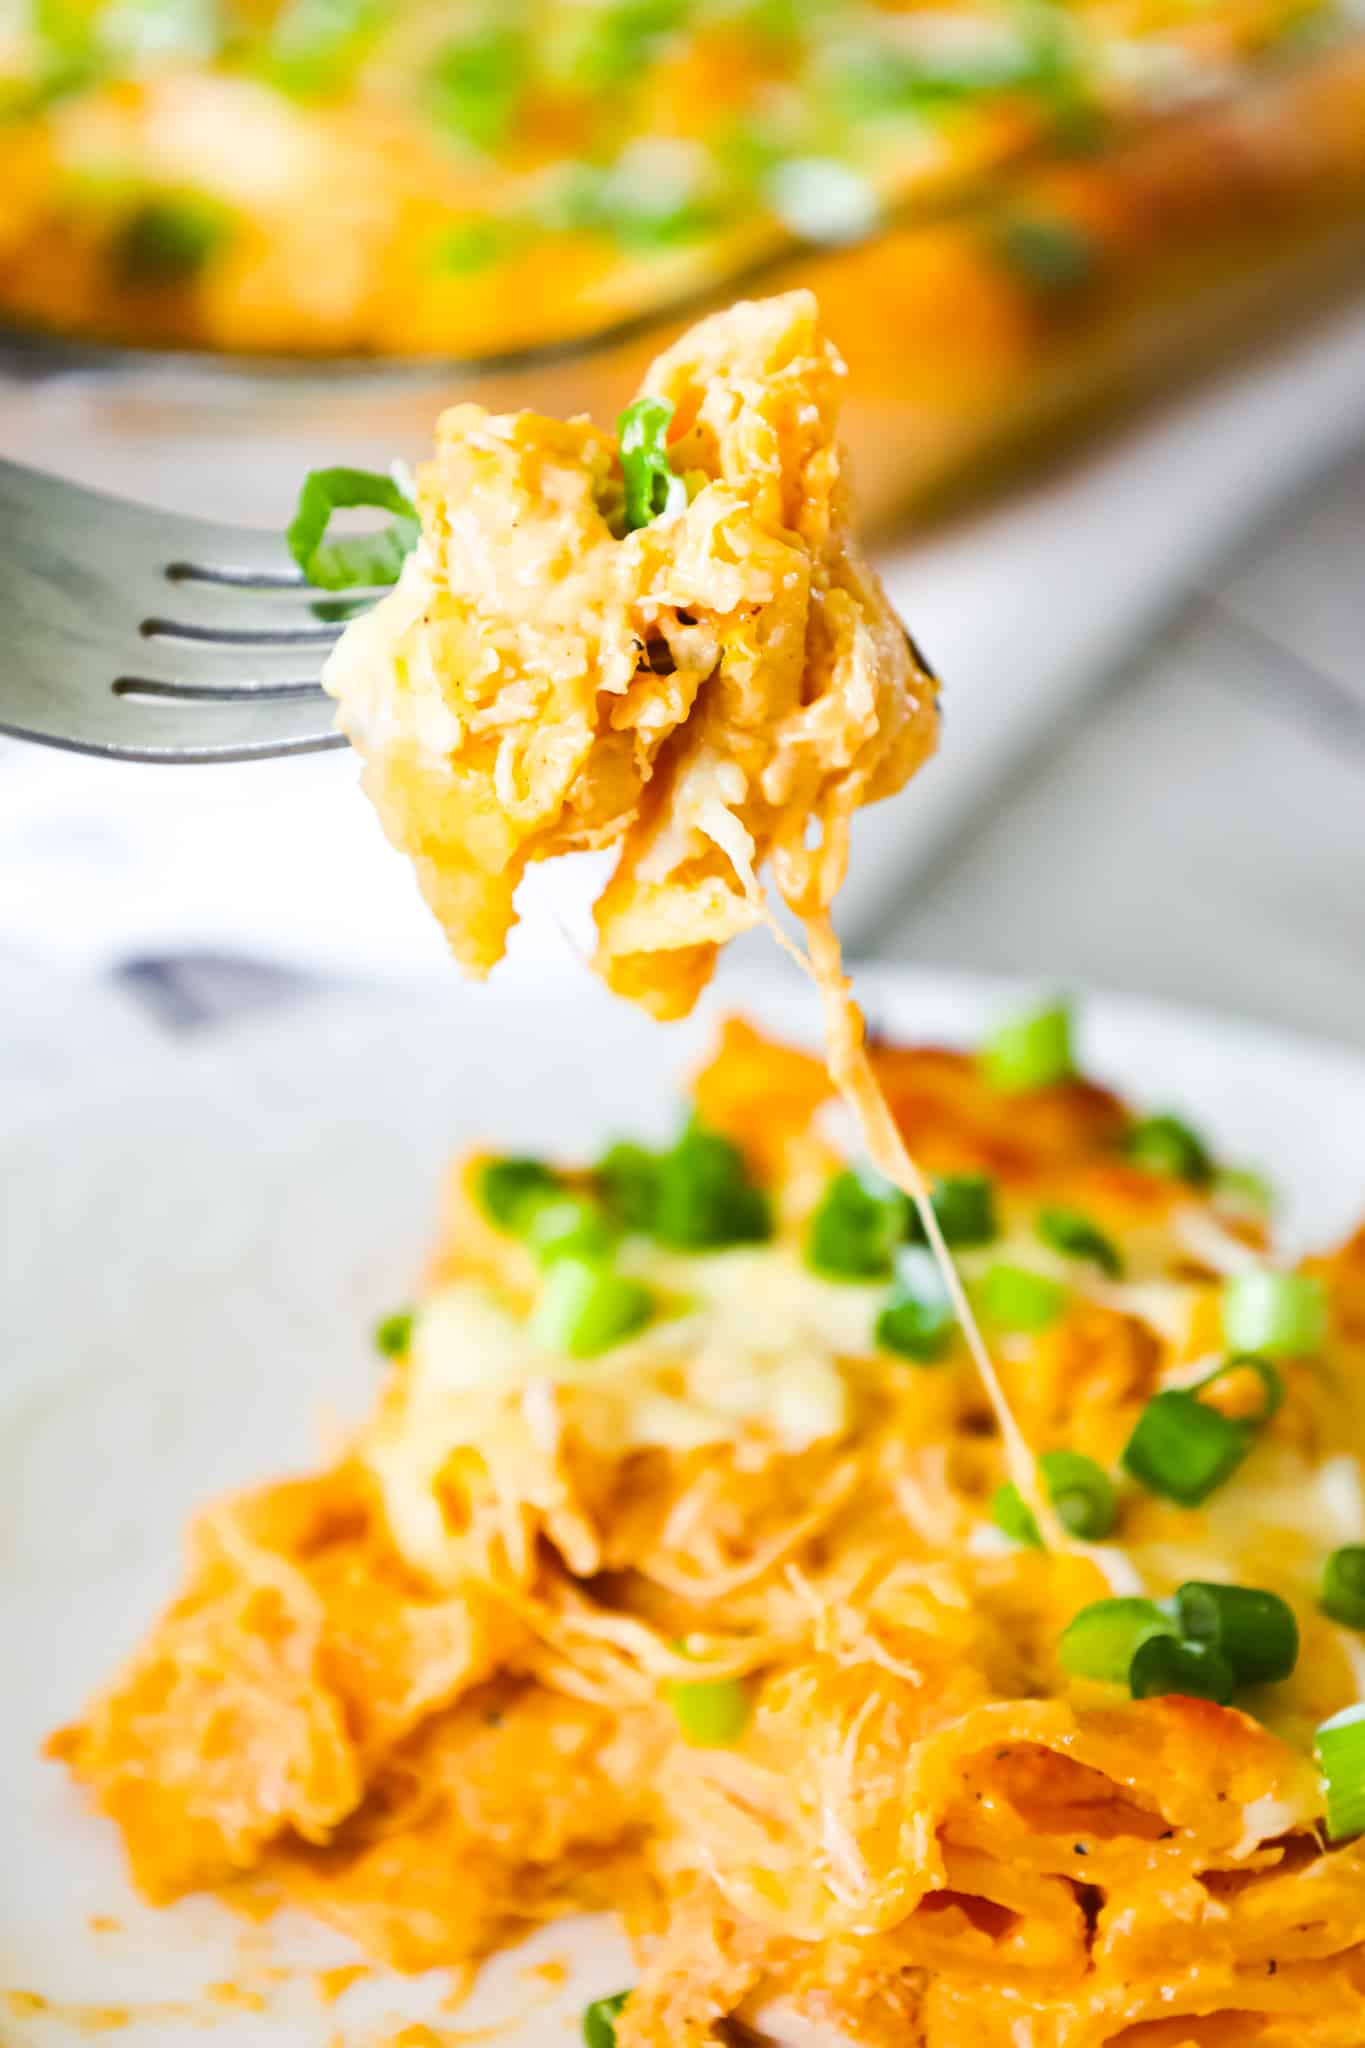 Buffalo Chicken Pasta Bake is a creamy baked penne pasta recipe loaded with shredded rotisserie chicken, cream cheese, Buffalo sauce, ranch dressing, parmesan cheese and mozzarella cheese.